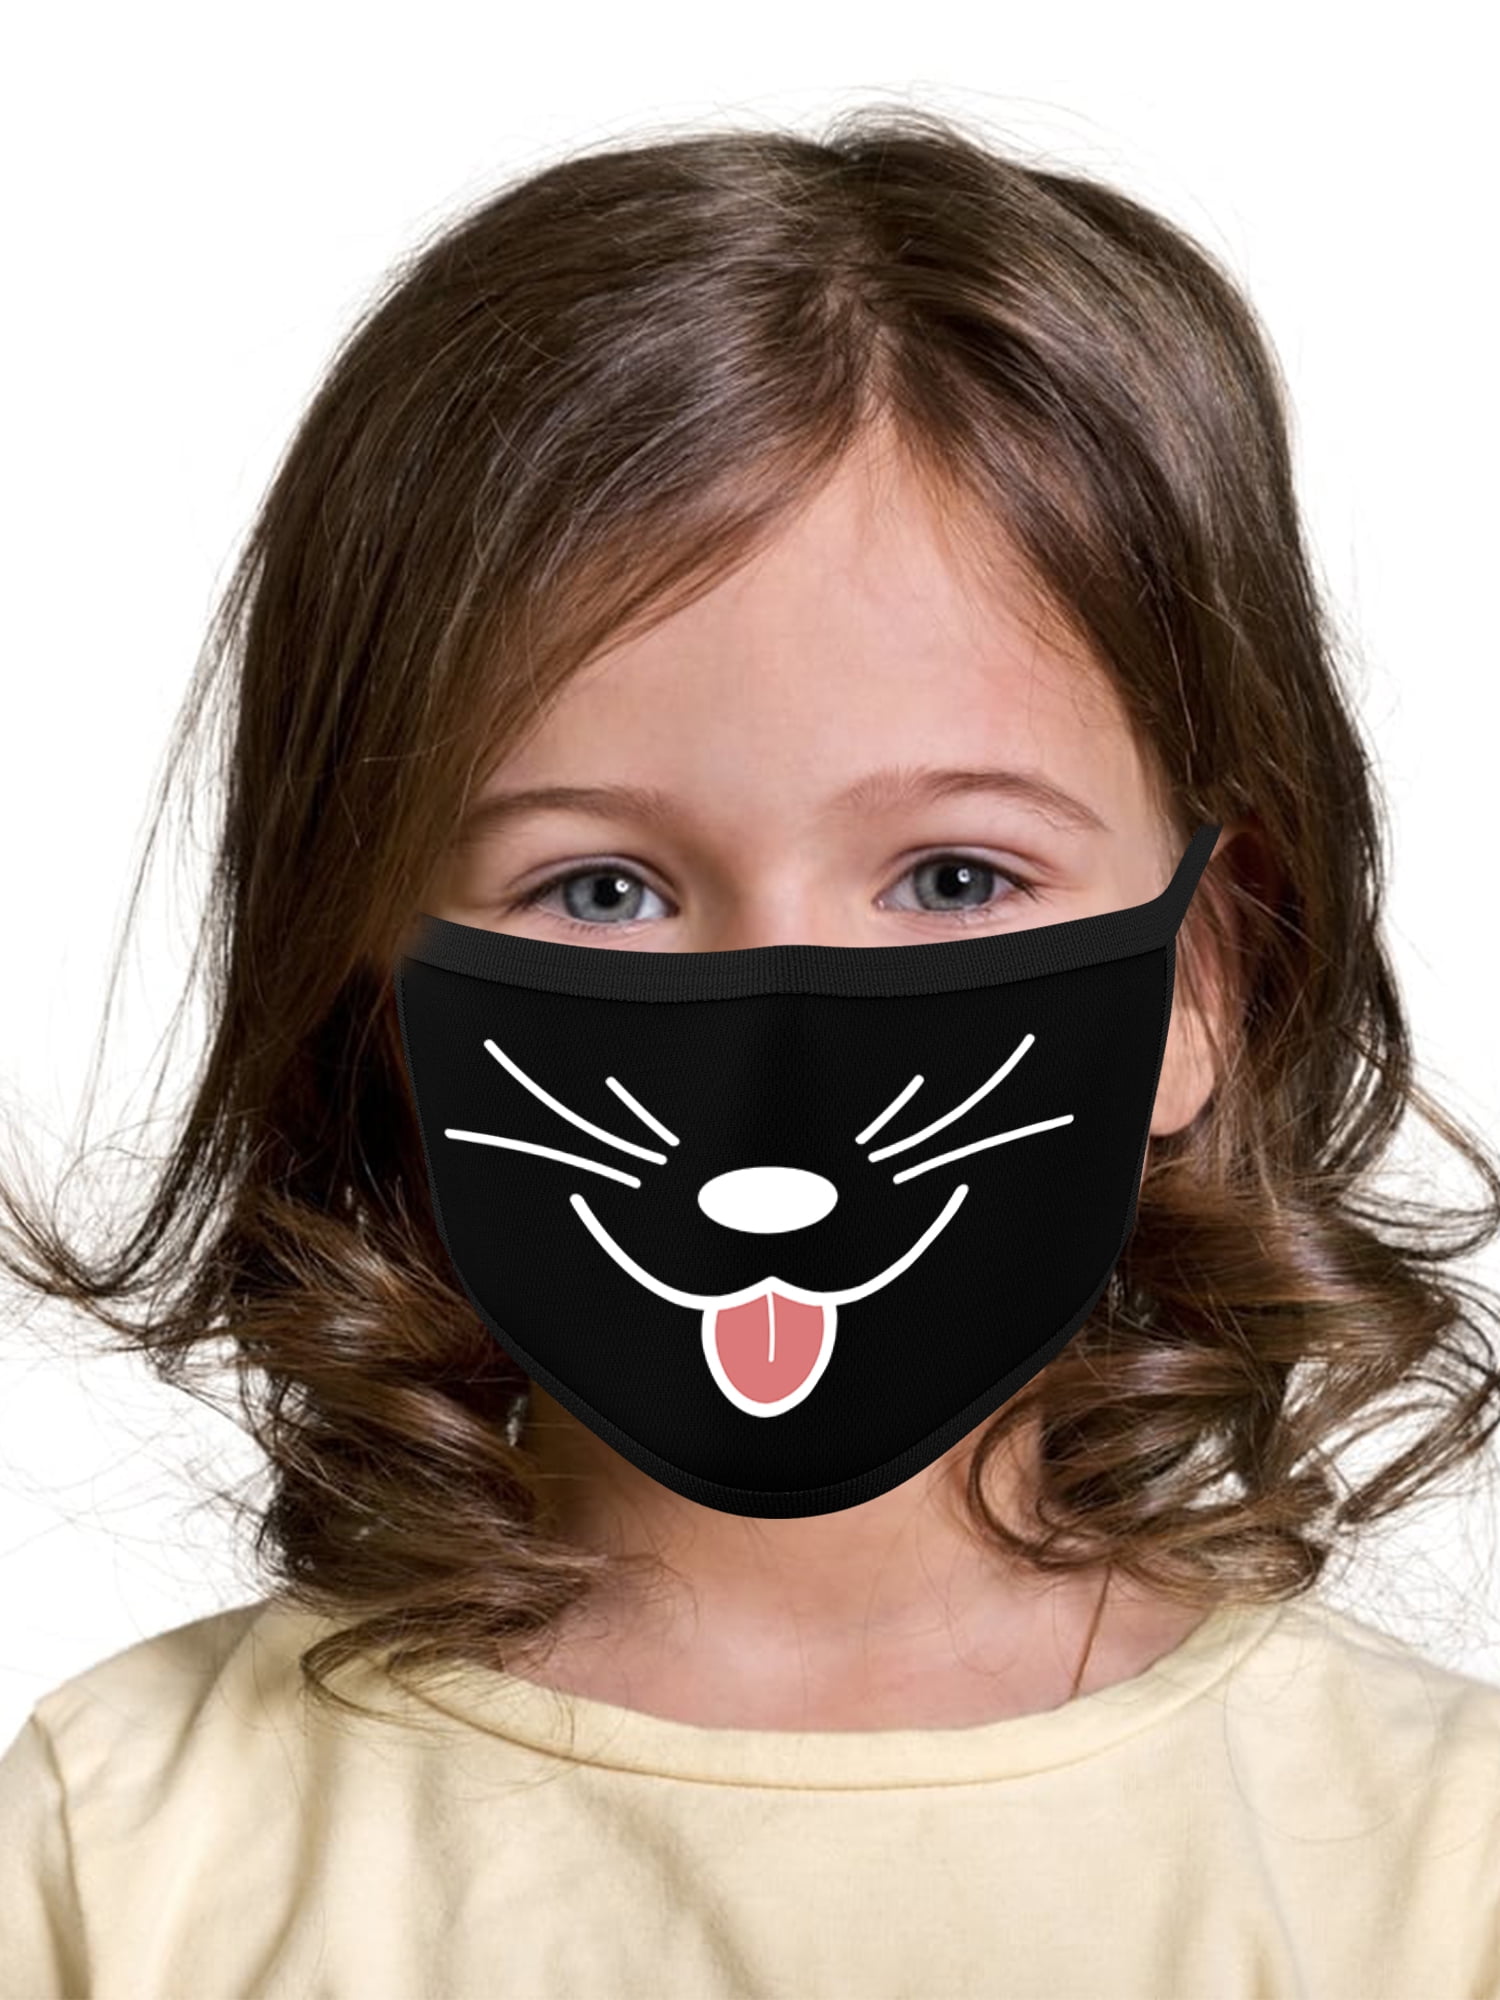 Cat Face Mask Kids Reusable Face Masks Washable 2 Layered Children Face Mask Kawaii Mask Cute Kitten Mask Fun Ages 4 to 10